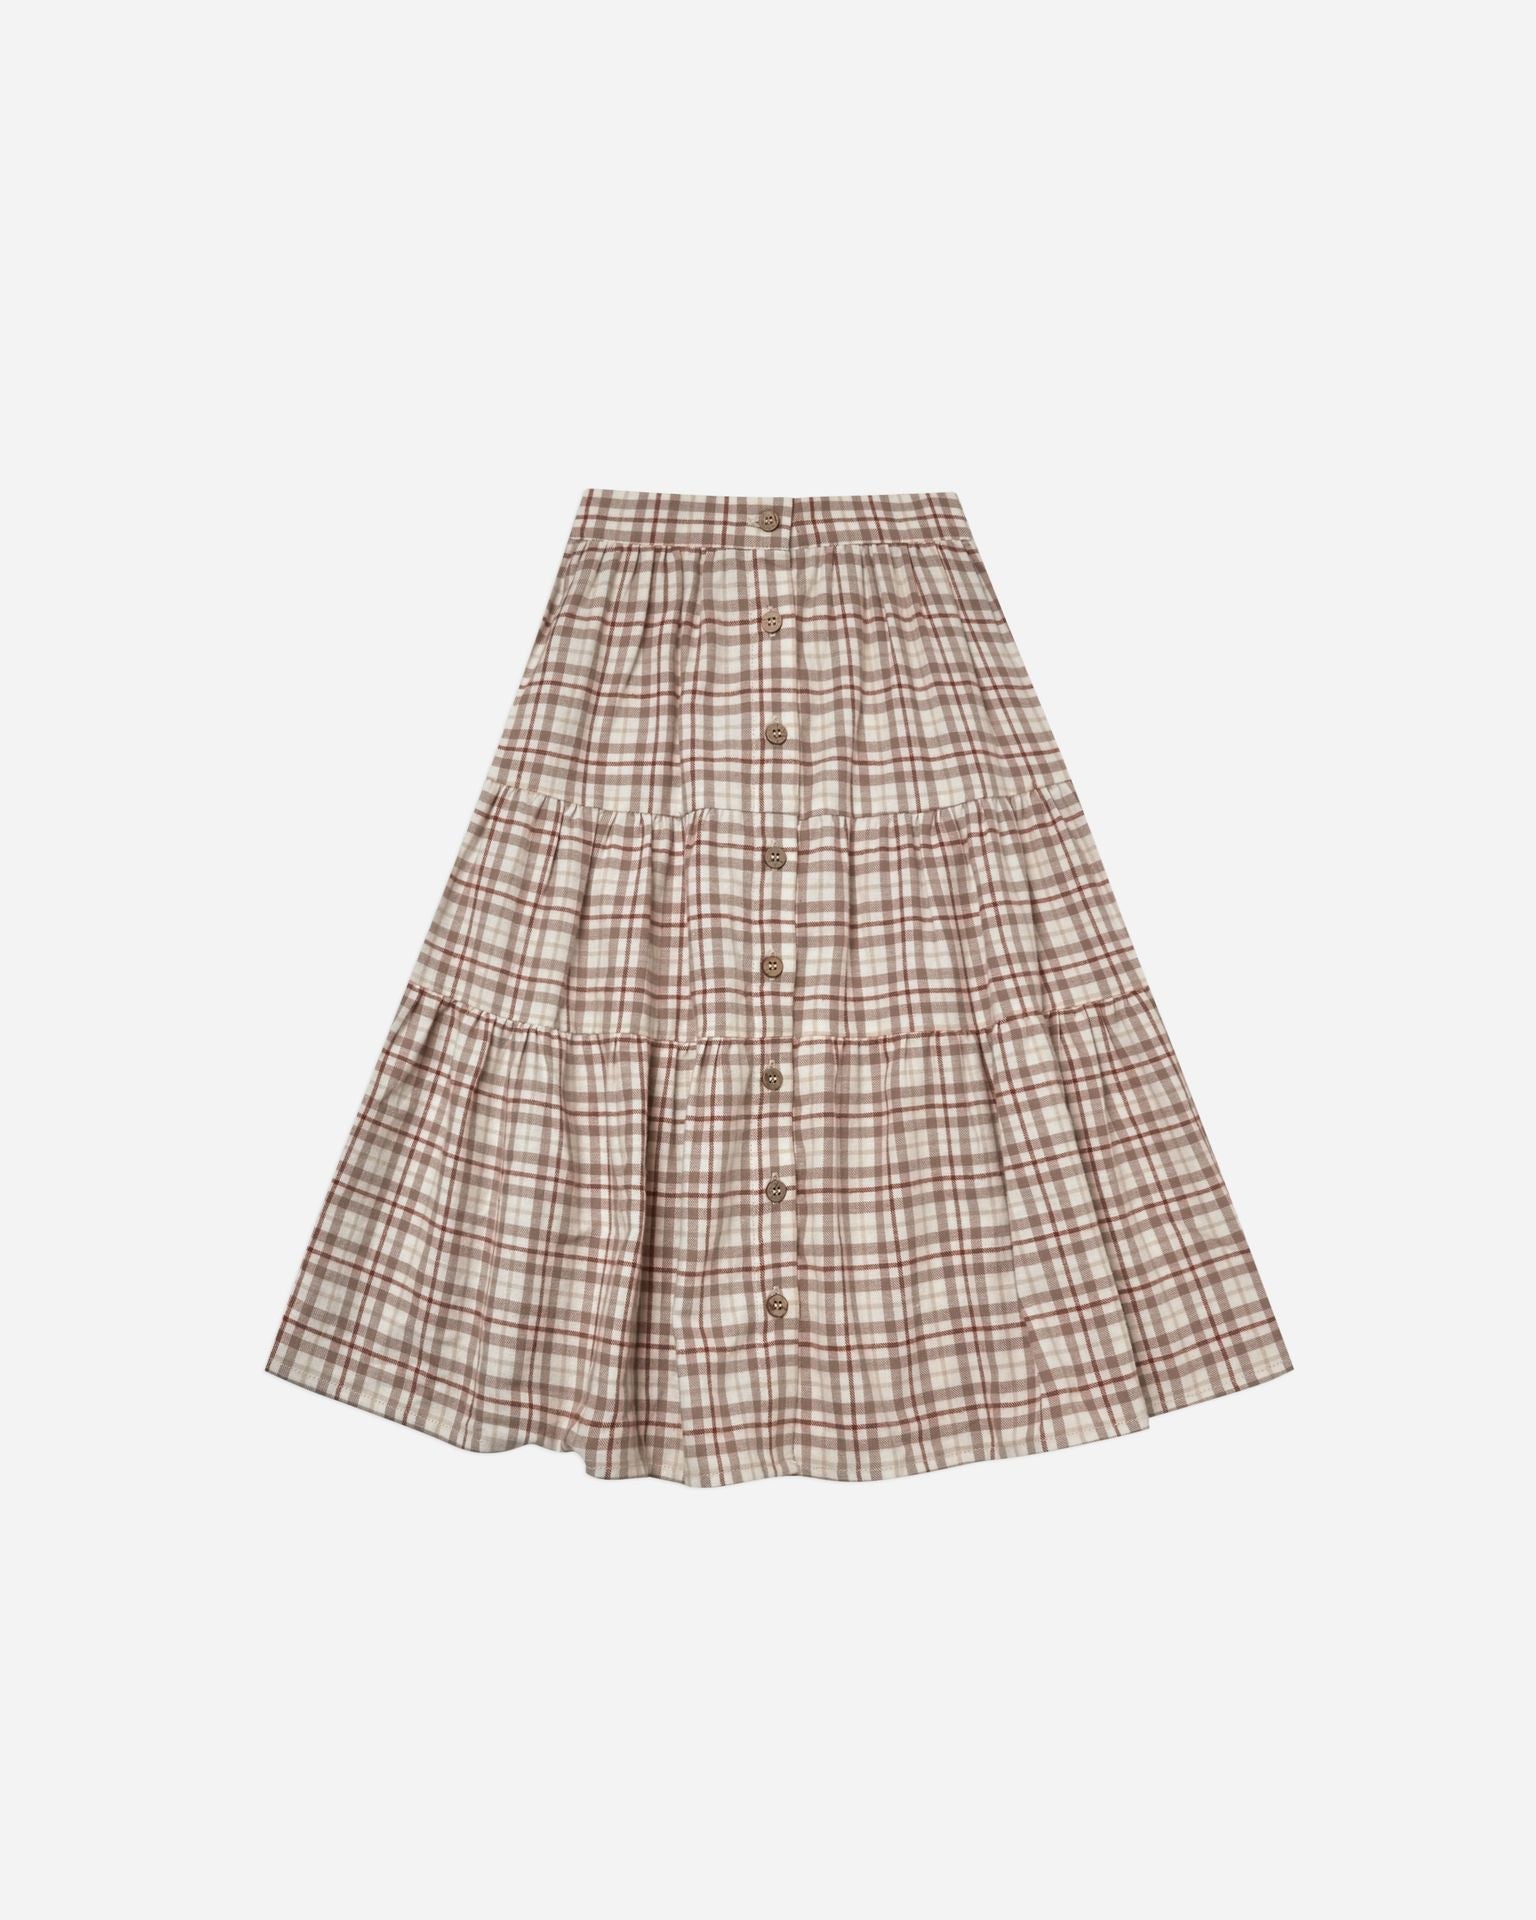 joelle skirt || mocha plaid - Rylee + Cru | Kids Clothes | Trendy Baby Clothes | Modern Infant Outfits |